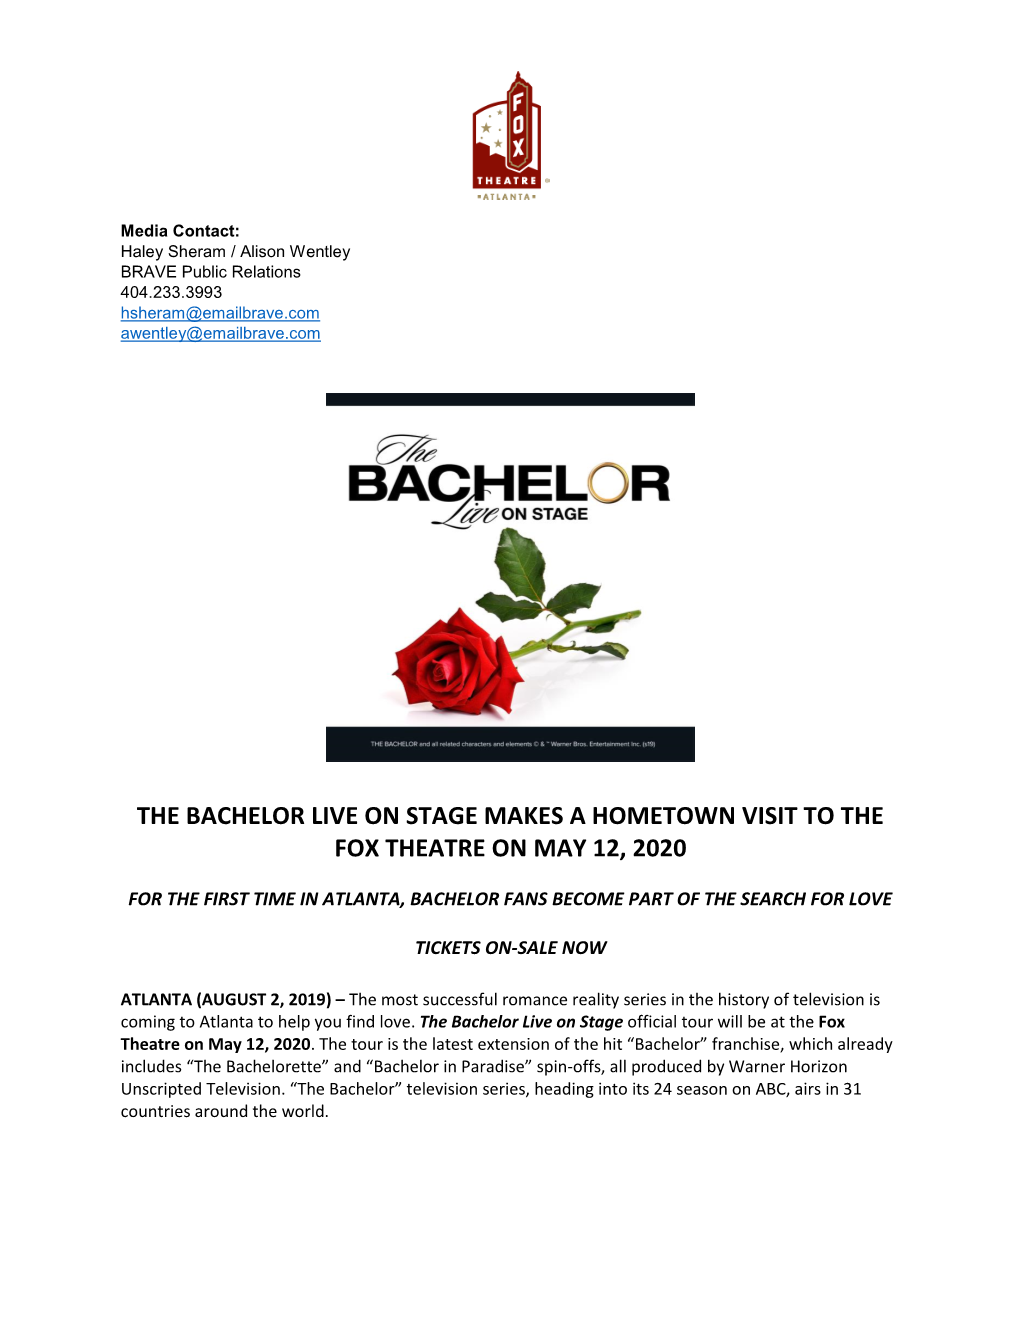 The Bachelor Live on Stage Makes a Hometown Visit to the Fox Theatre on May 12, 2020